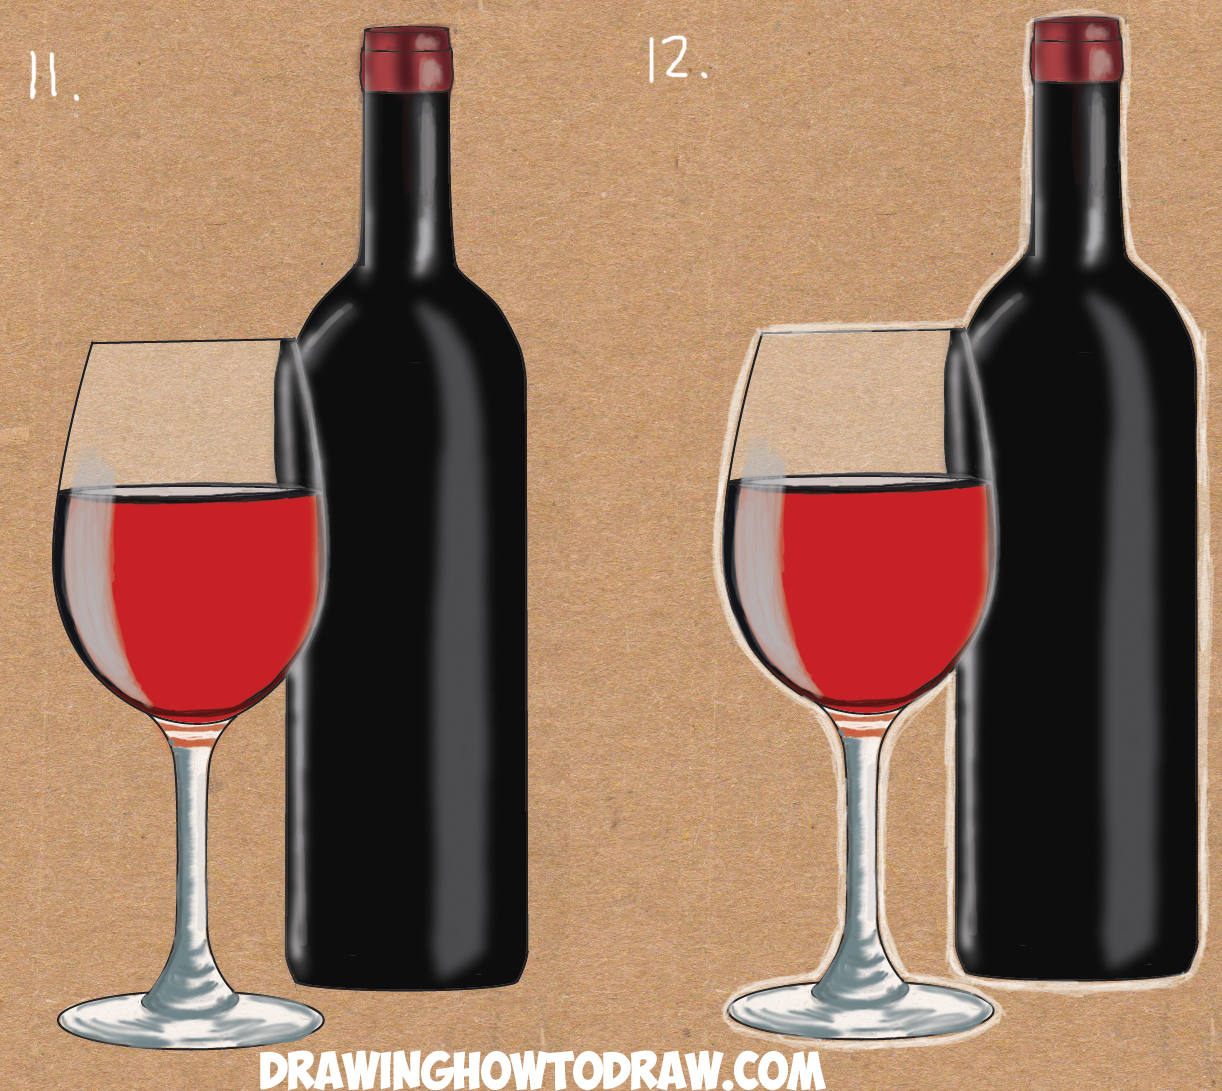 How to Draw a Bottle and Glasses of Wine Drawing Tutorial ...